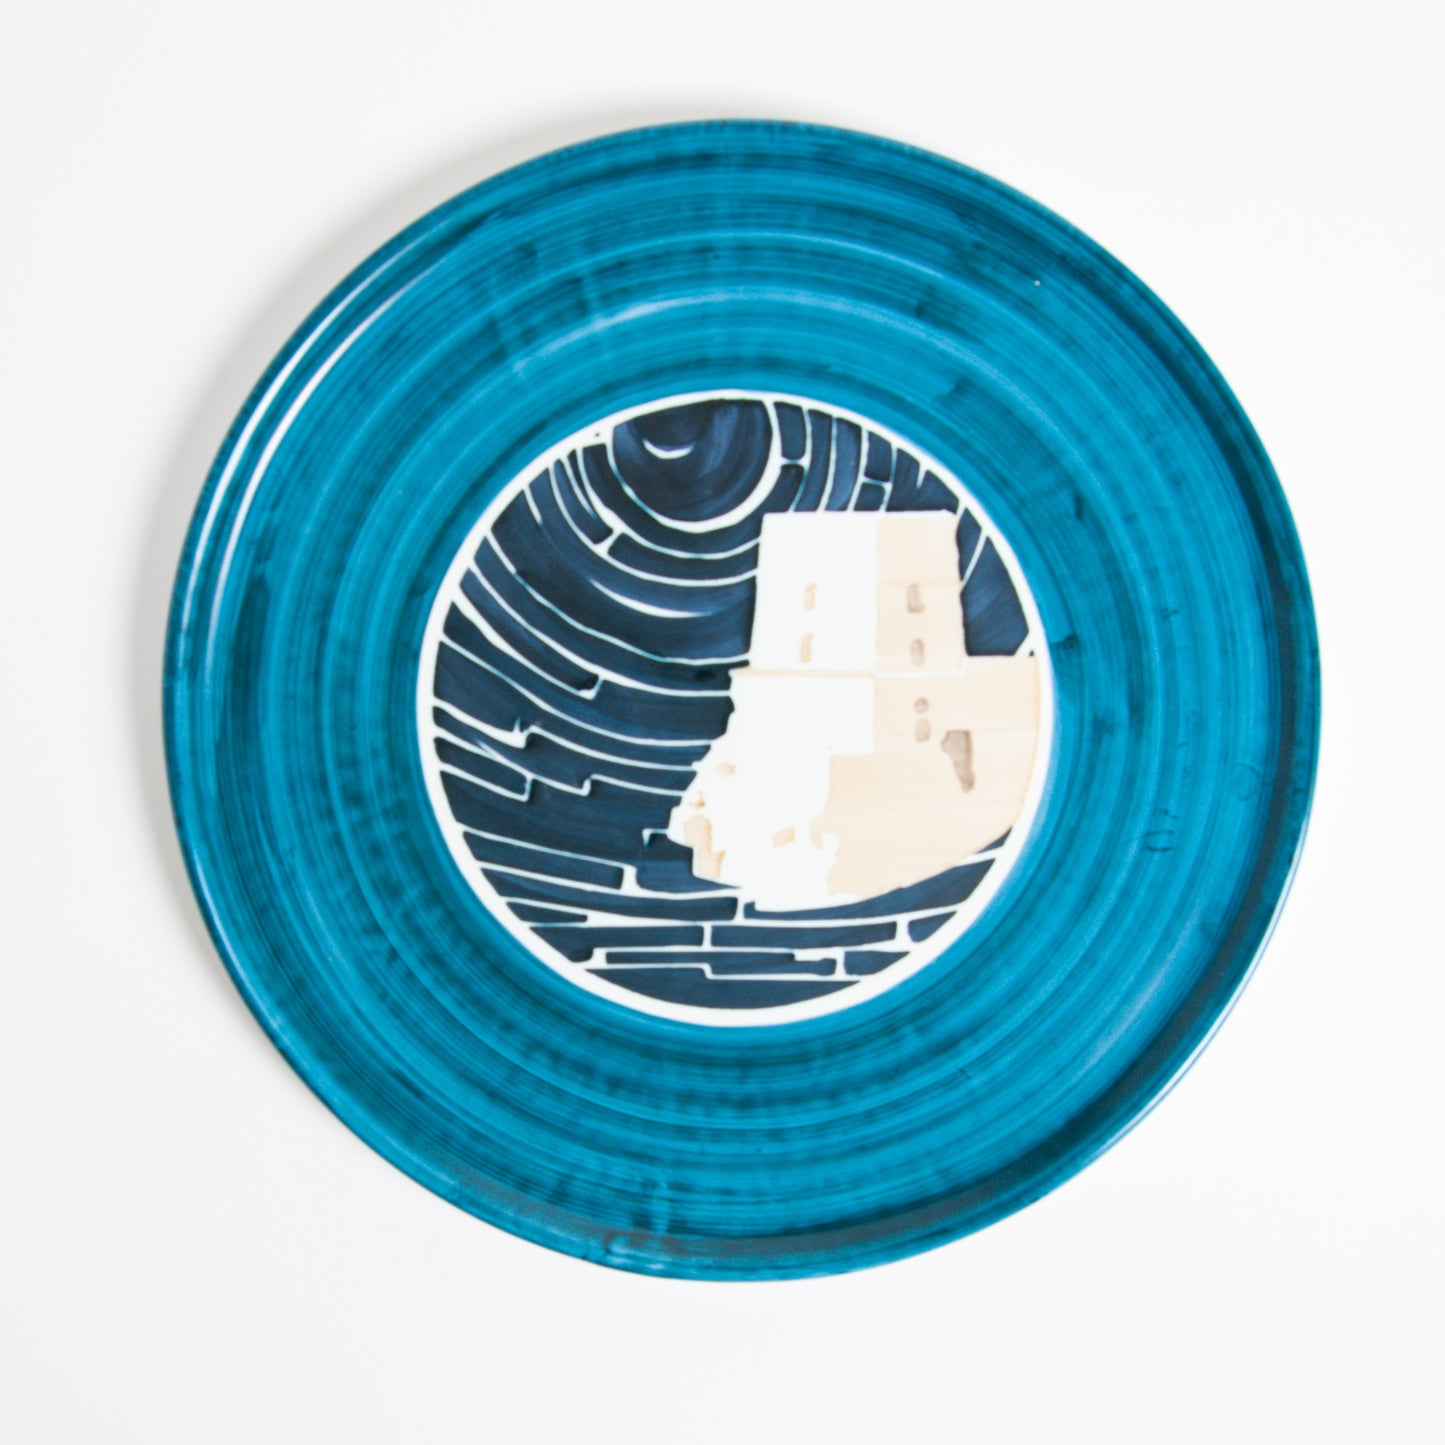 Turquoise fornillo wall dish